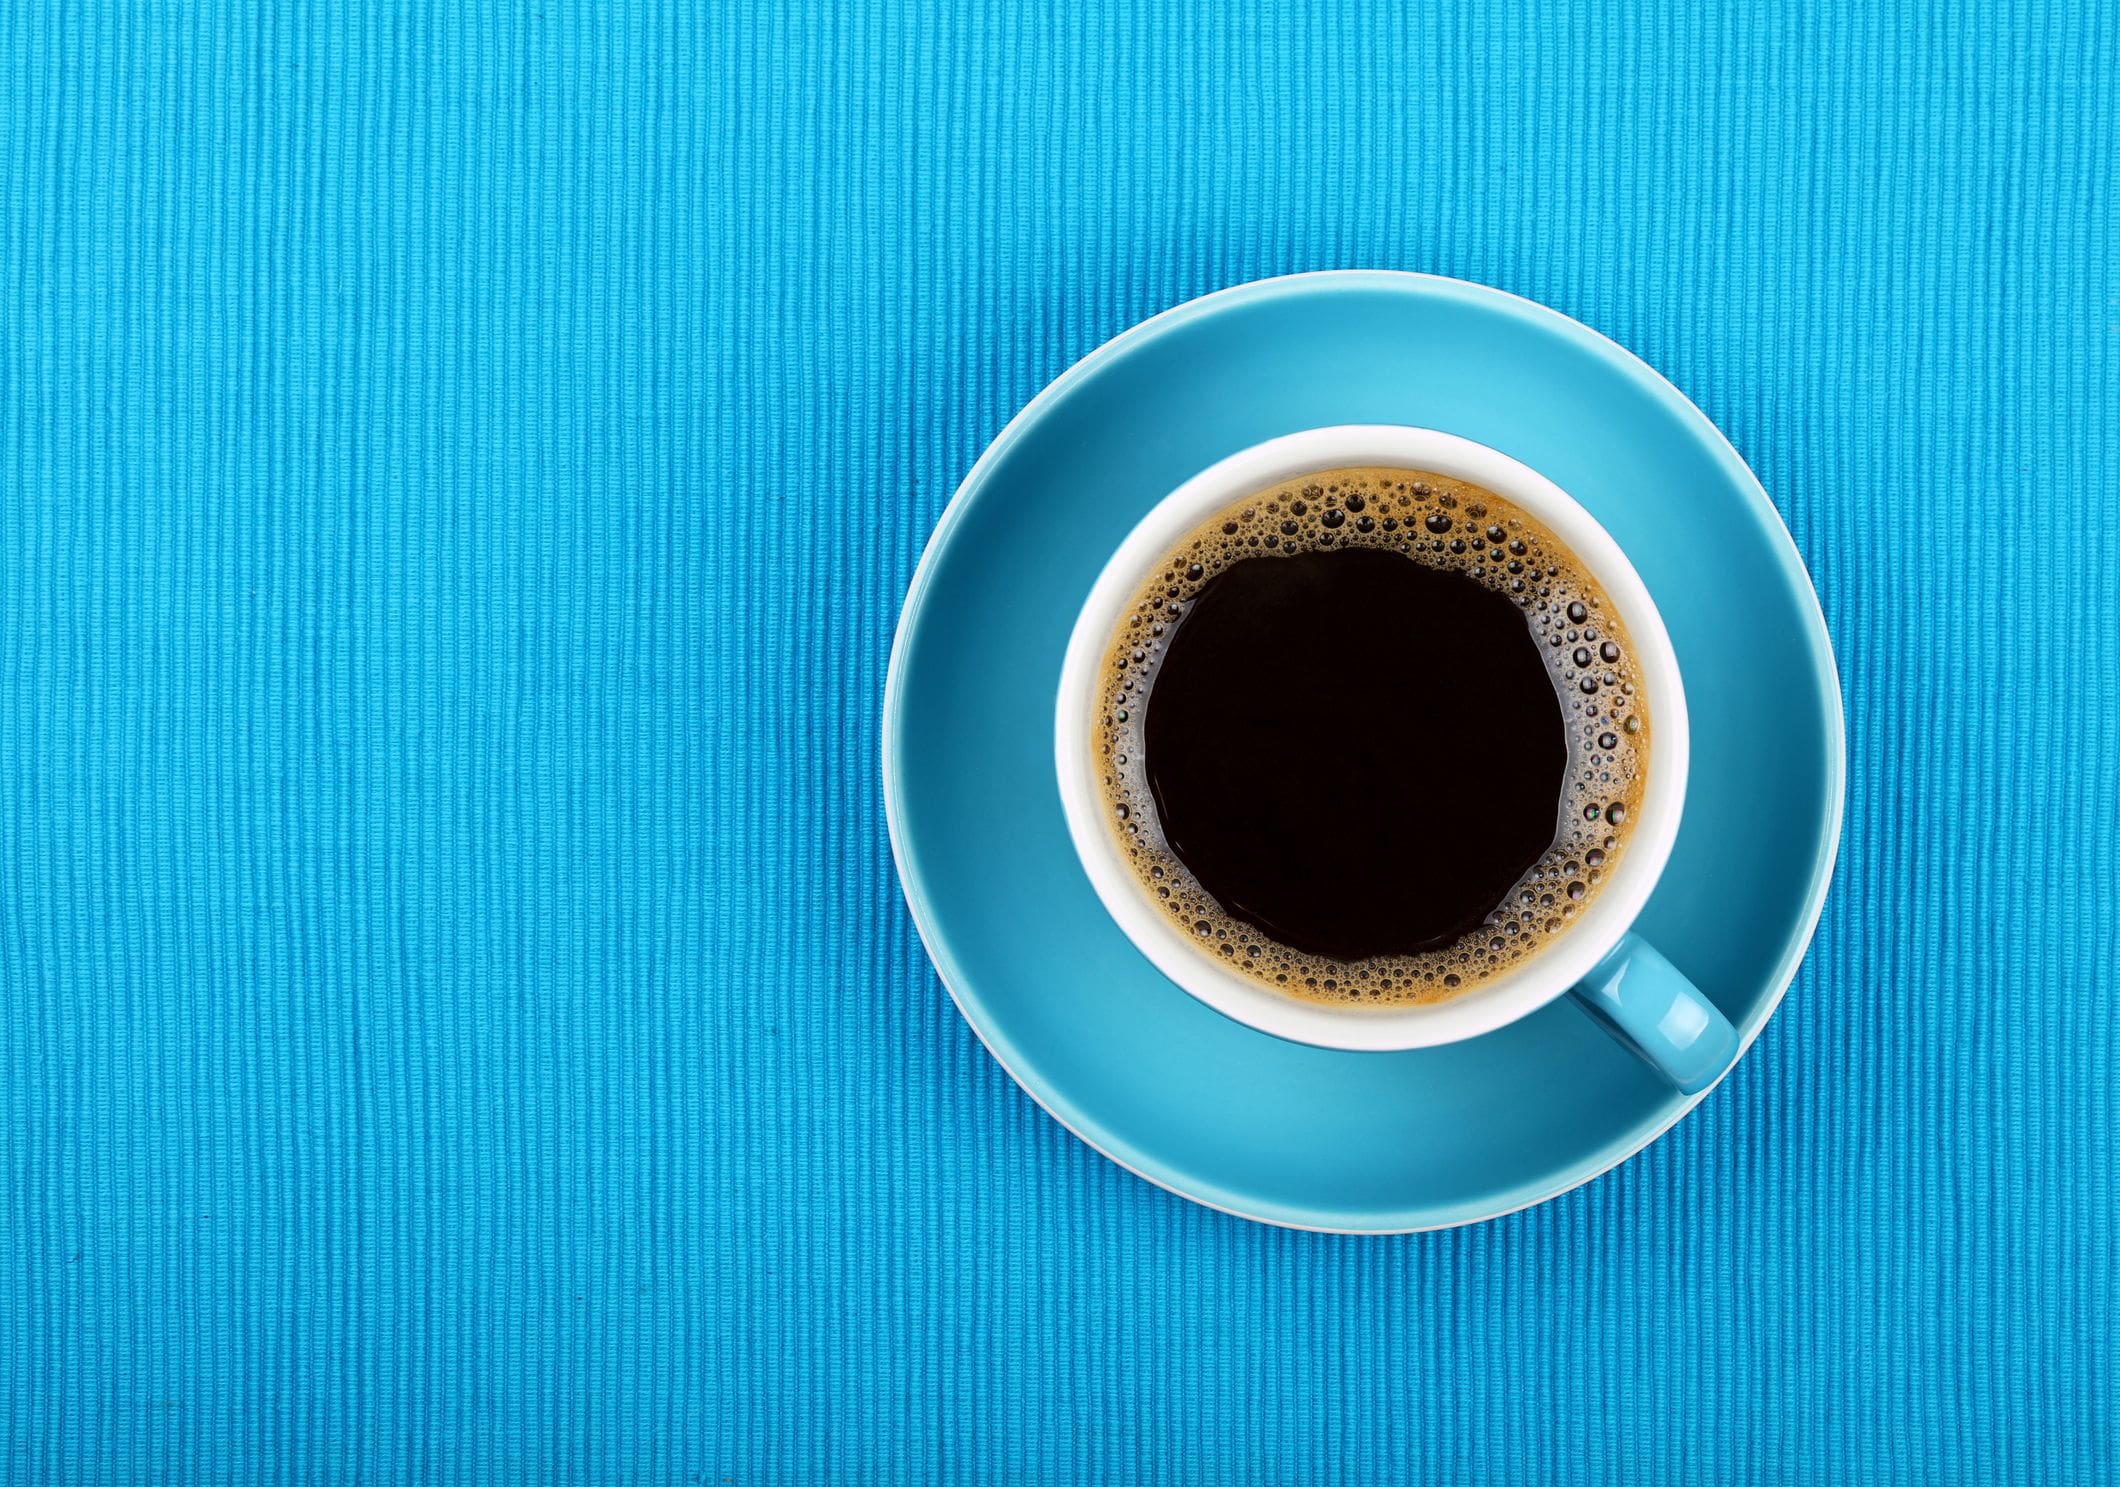 Is a coffee habit coded in your genes?